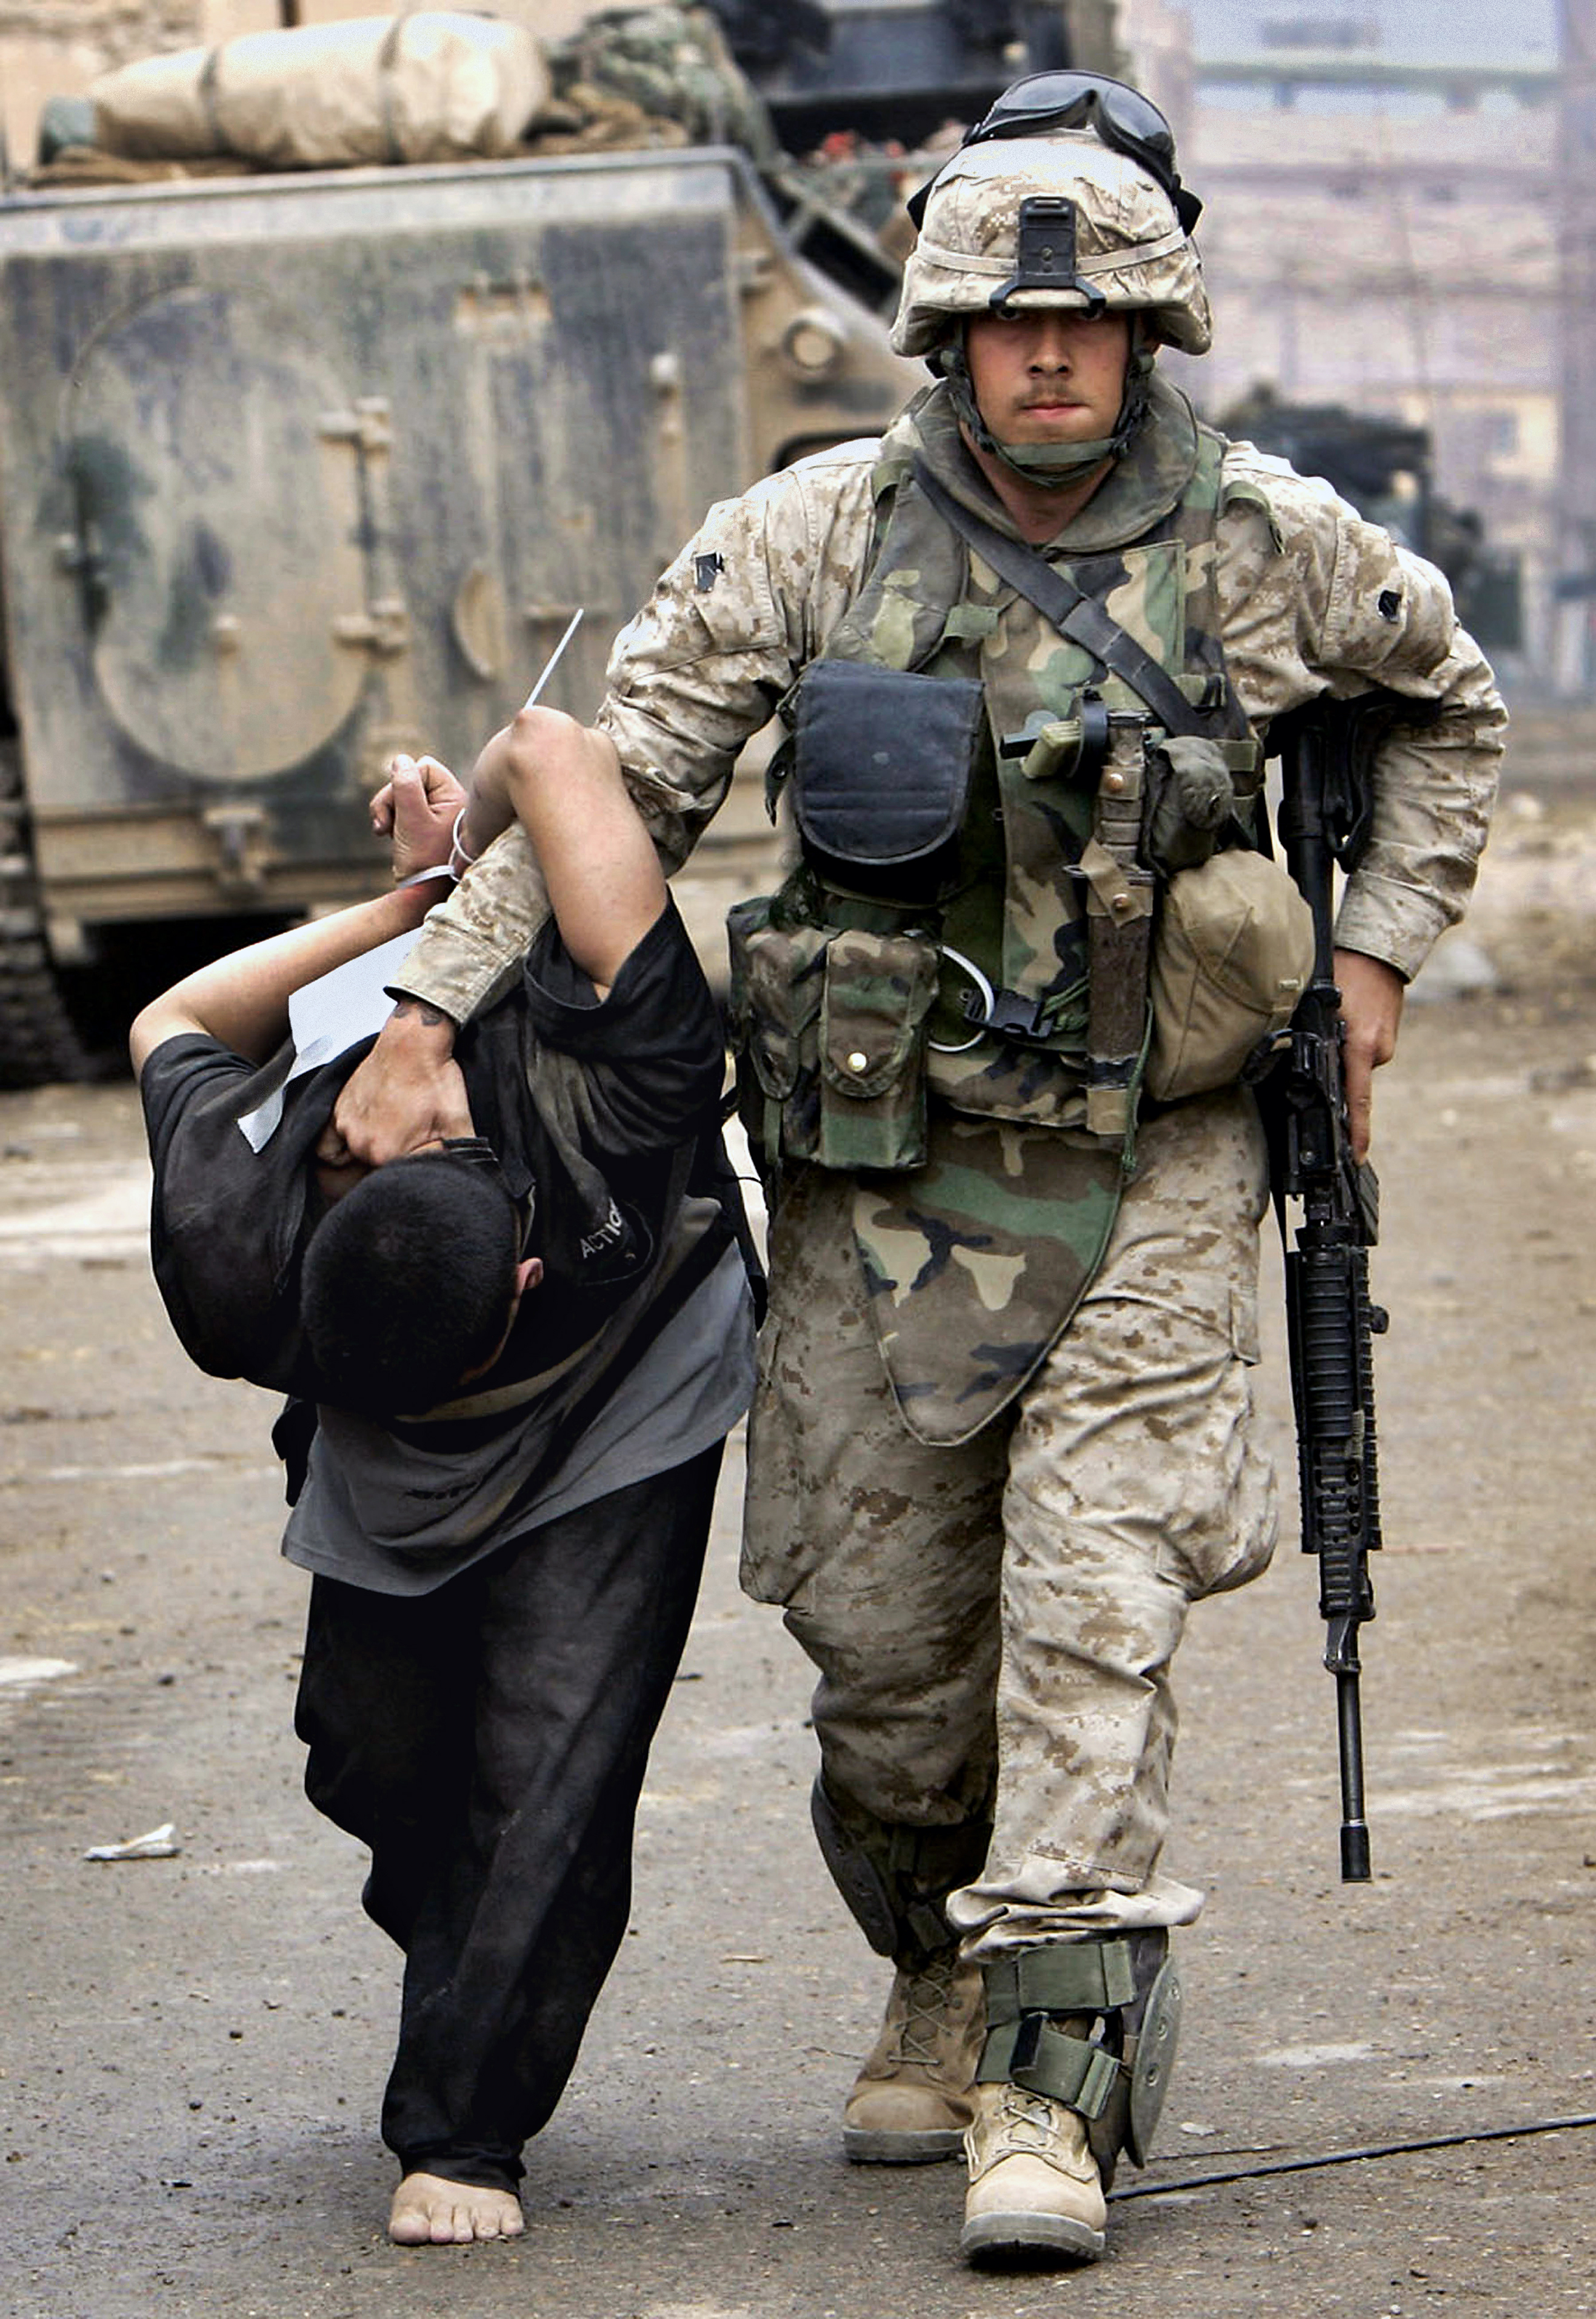 A U.S. Marine leads away a captured Iraqi man in the center of Fallujah, Iraq, Nov. 12, 2004. This photograph is one in a portfolio of twenty taken by eleven different Associated Press photographers throughout 2004 in Iraq. The Associated Press won a Pulitzer prize in breaking news photography, Monday April 4, 2005 for the series of pictures of bloody combat in Iraq. The award was the AP's 48th Pulitzer. (AP Photo/Anja Niedringhaus)